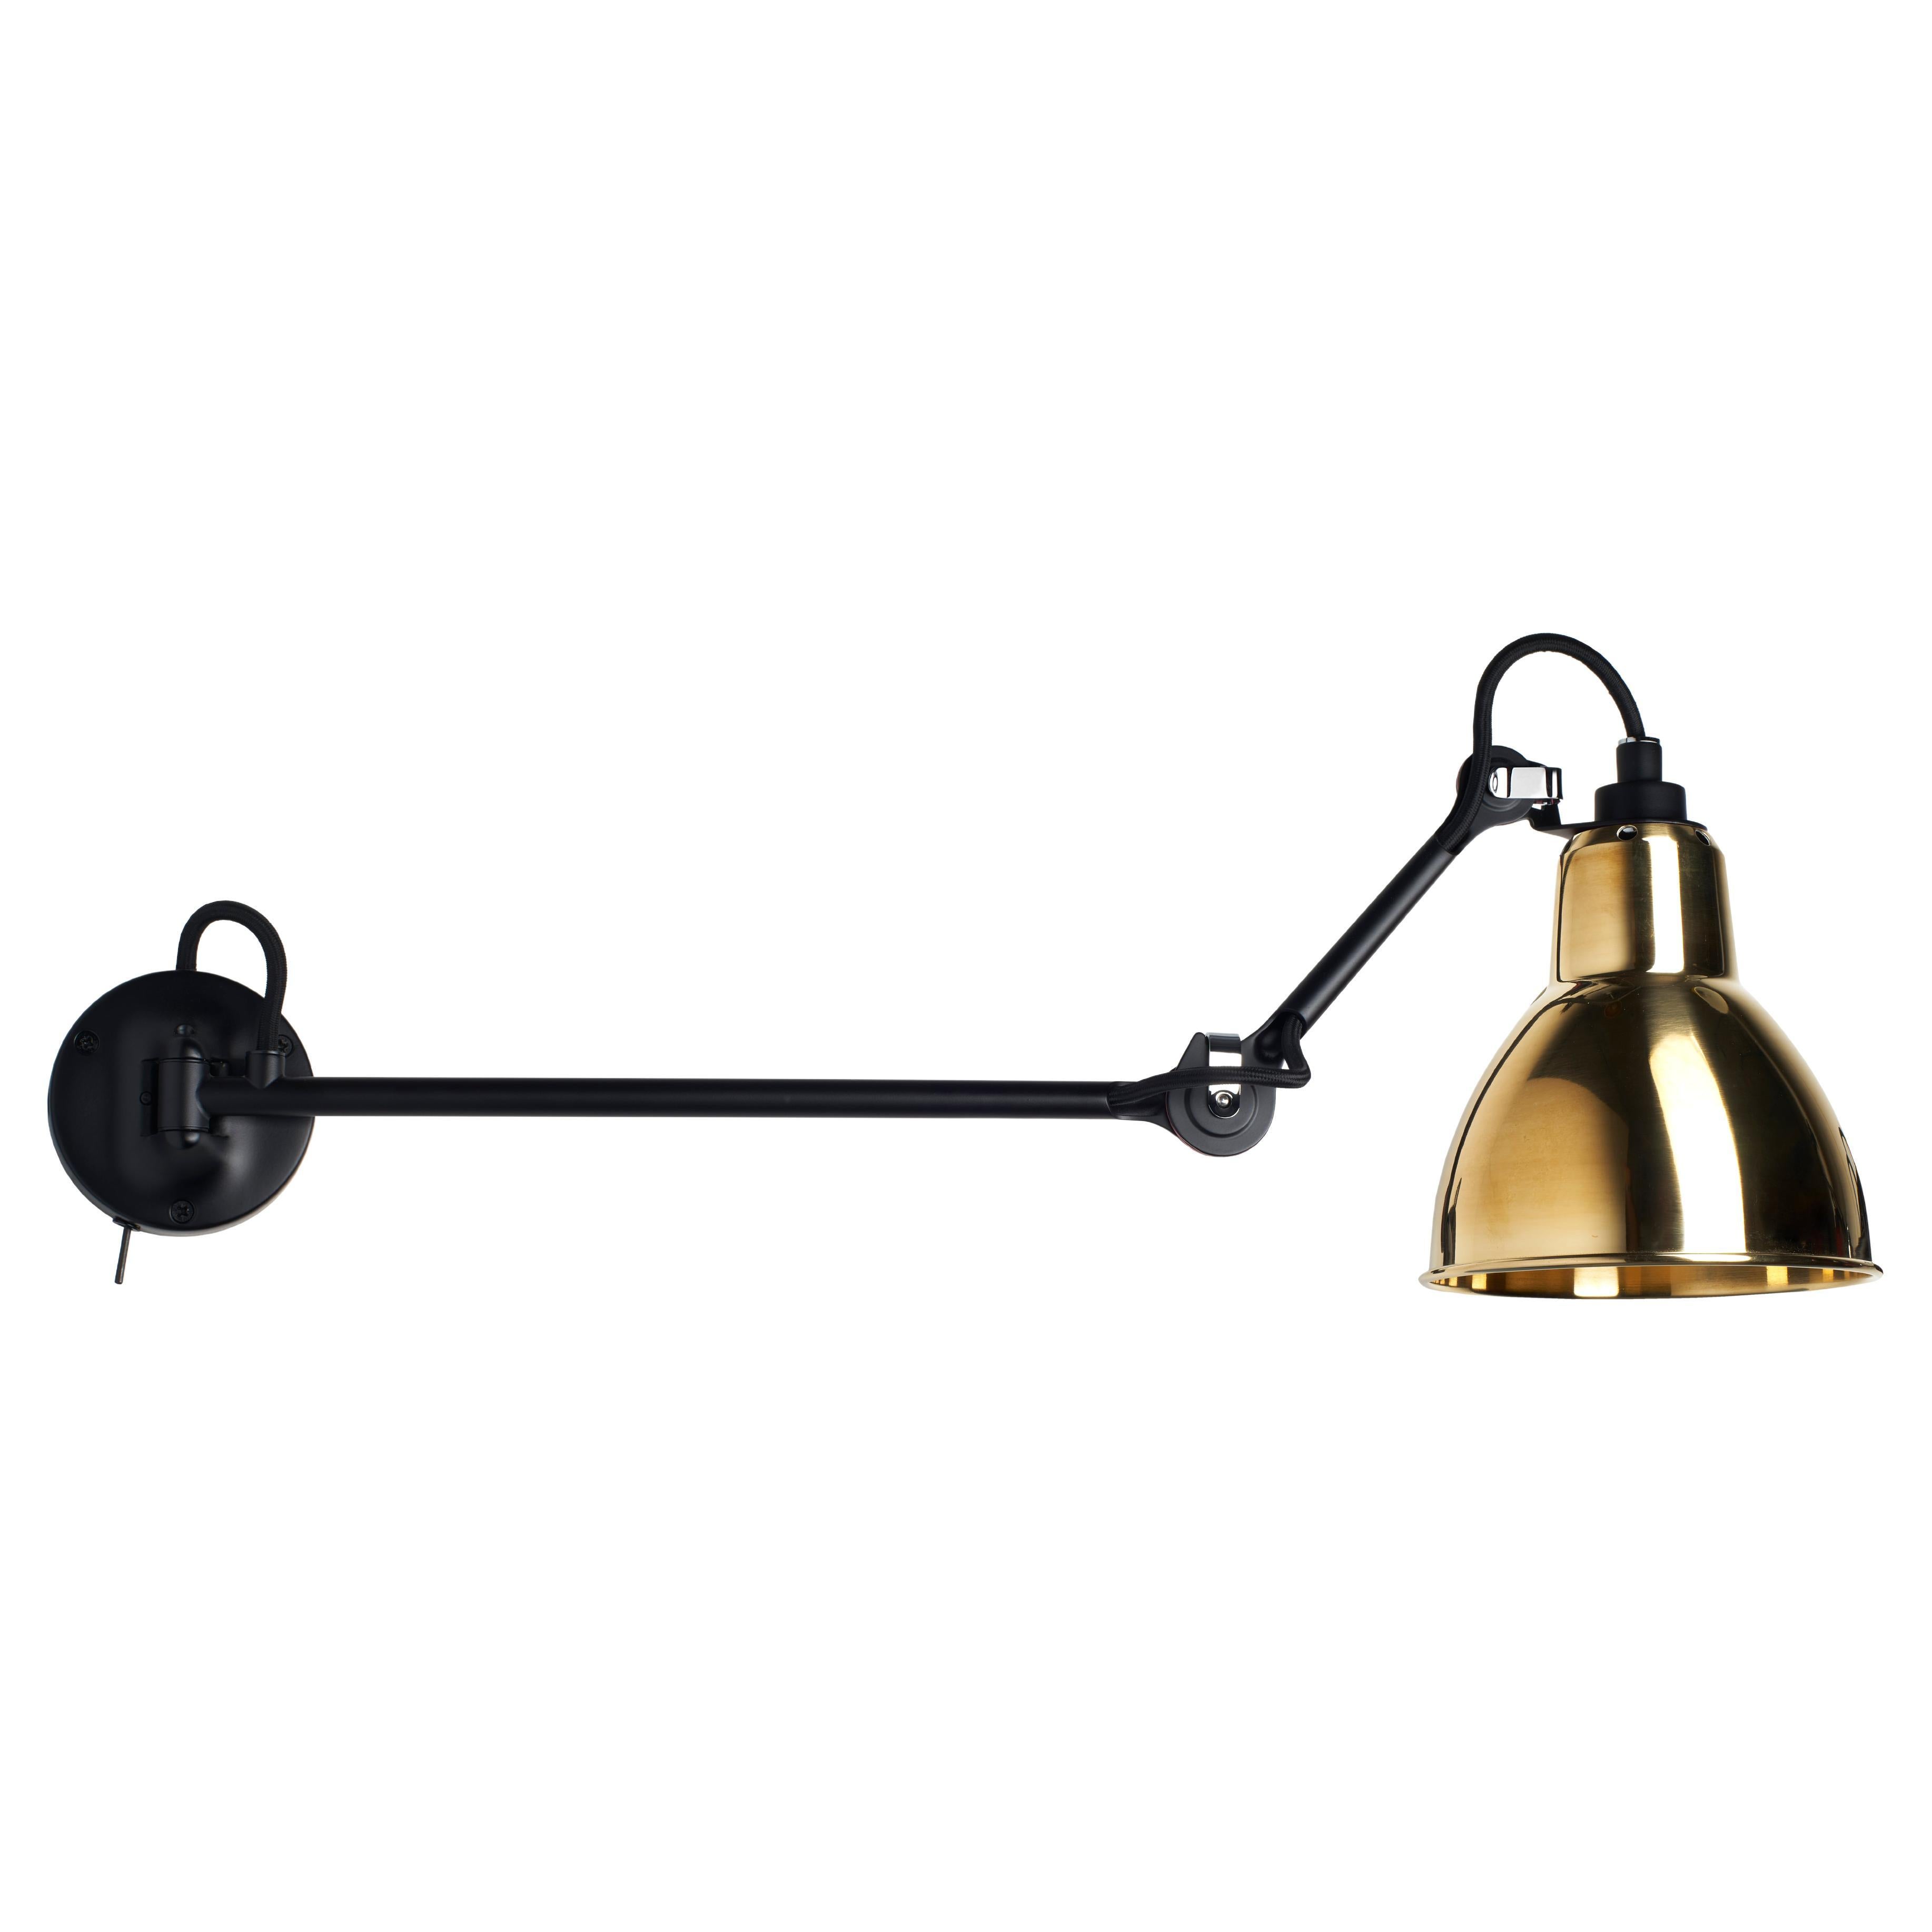 DCW Editions La Lampe Gras N°204 L40 SW Wall Lamp in Black Arm & Brass Shade For Sale